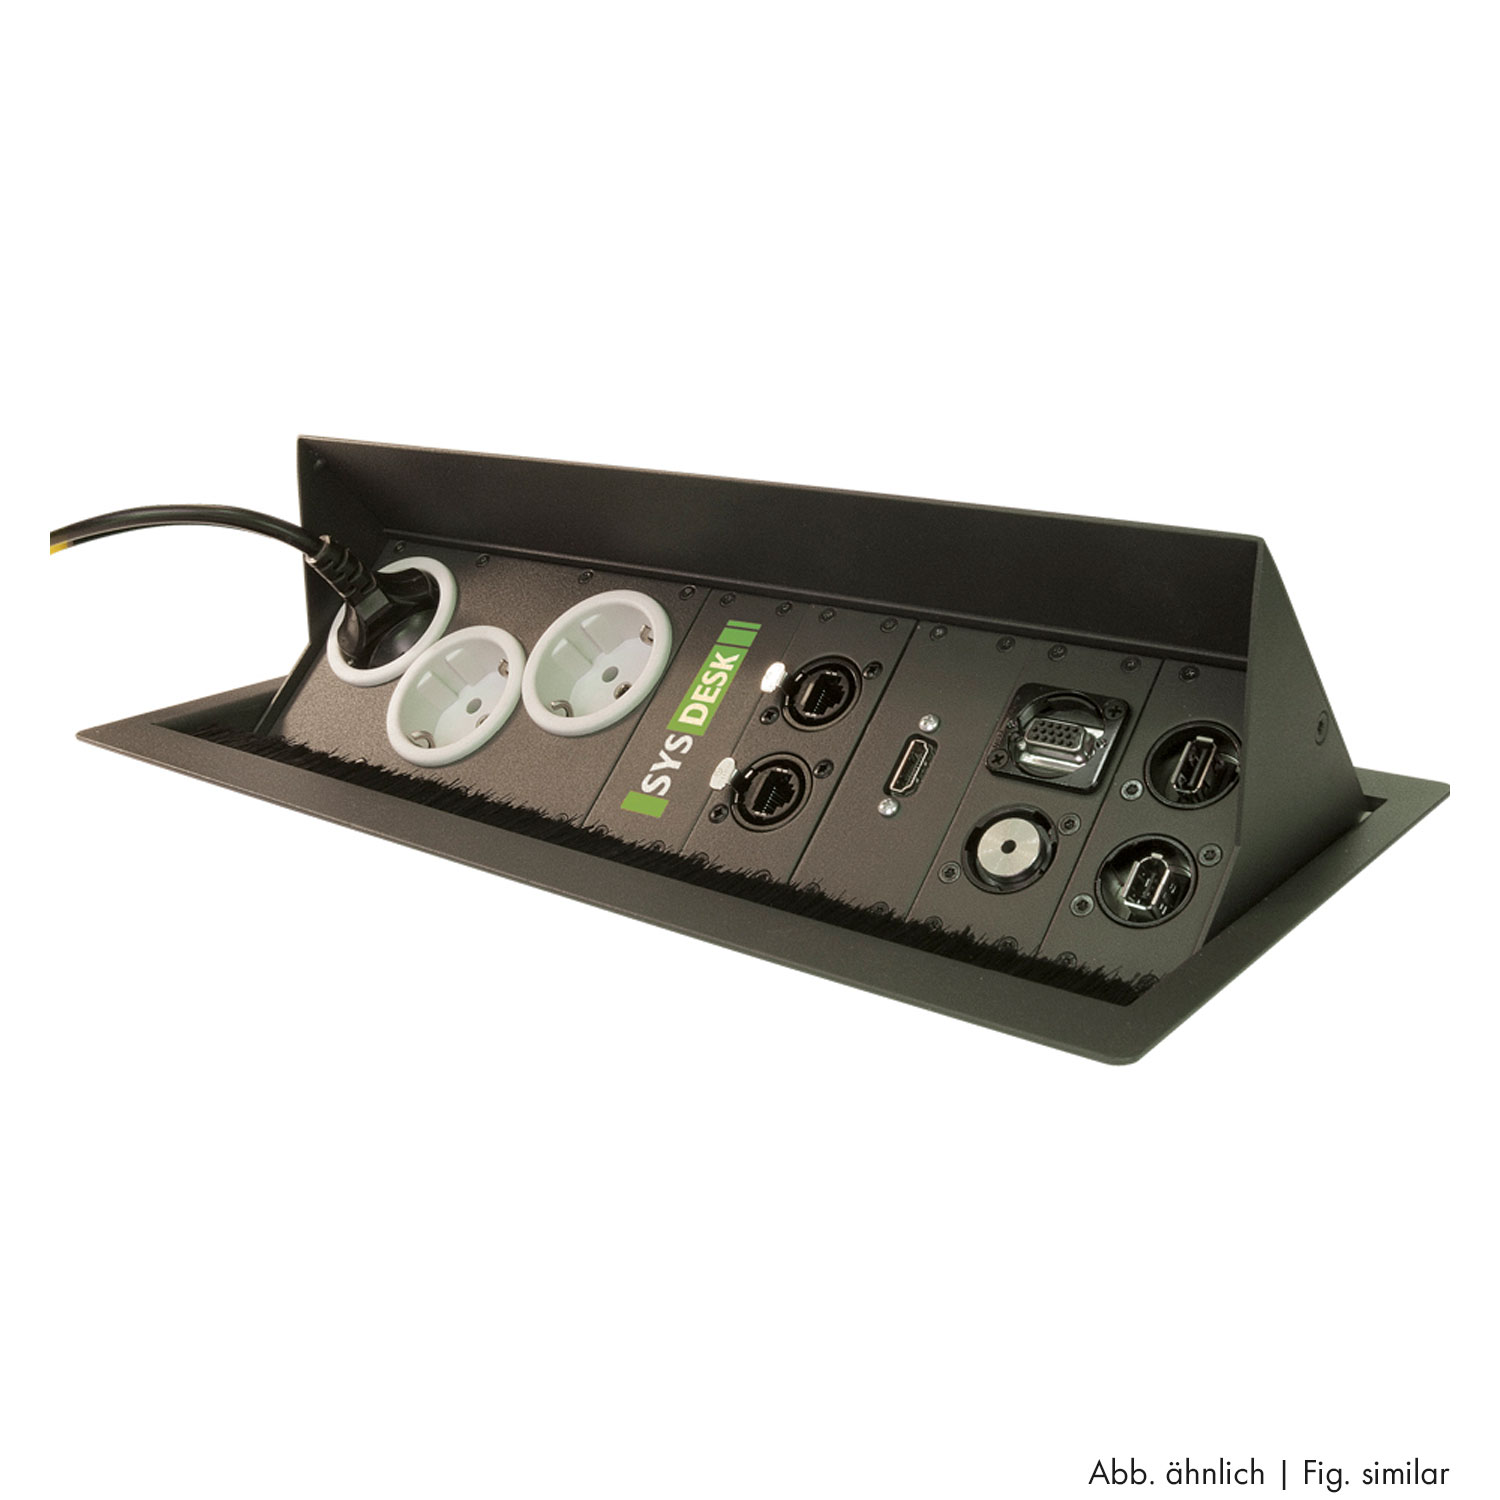 table insert box anthracite, 2 HE, 9 BE; depth: 193 mm for SYSBOXX-Module, colour: grey